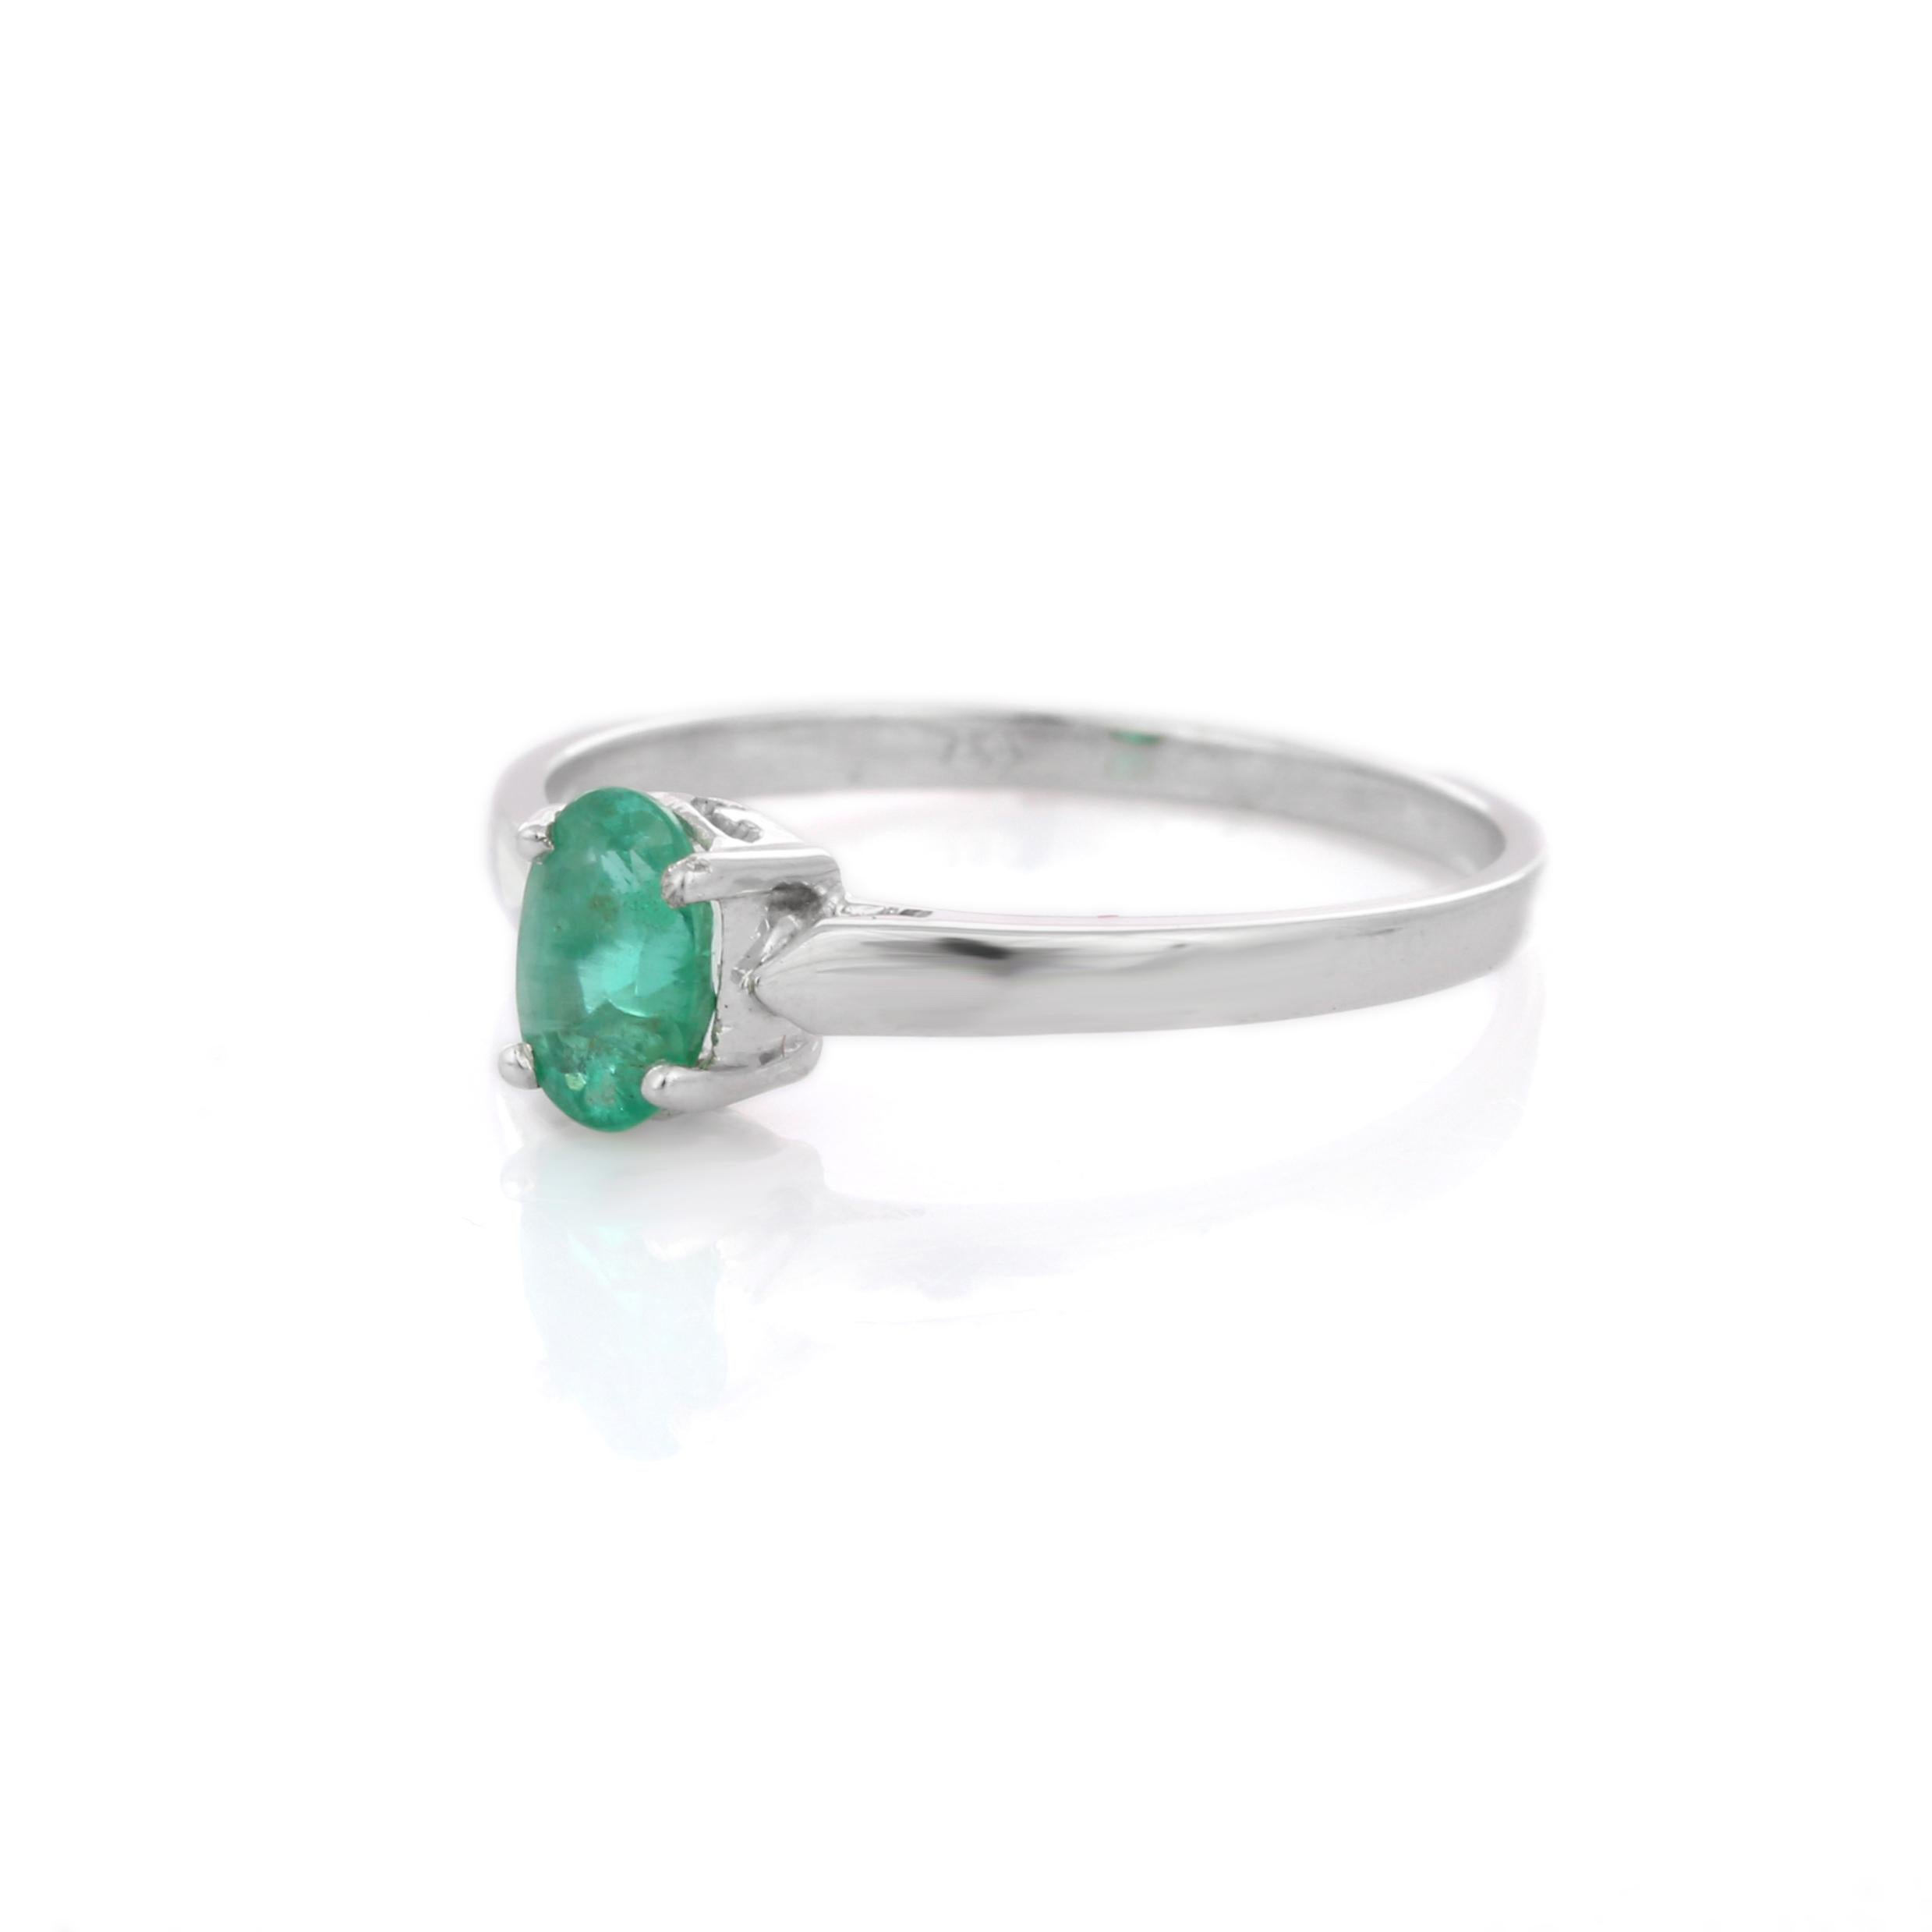 For Sale:  18K White Gold Minimalist Oval Cut Emerald Gemstone Stackable Solitaire Ring  3